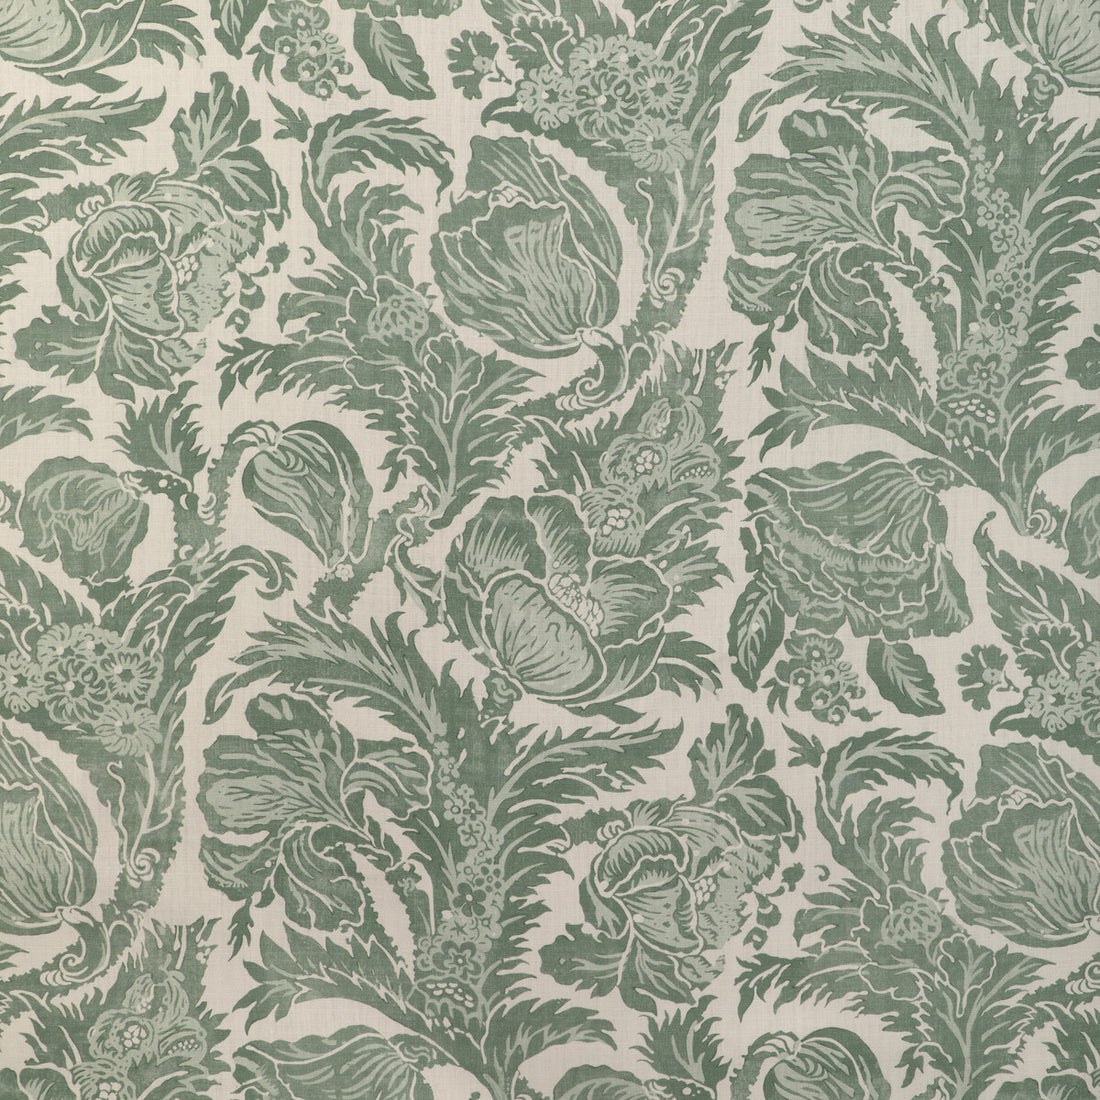 Marion Print fabric in sage color - pattern 2020205.30.0 - by Lee Jofa in the Clare Prints collection